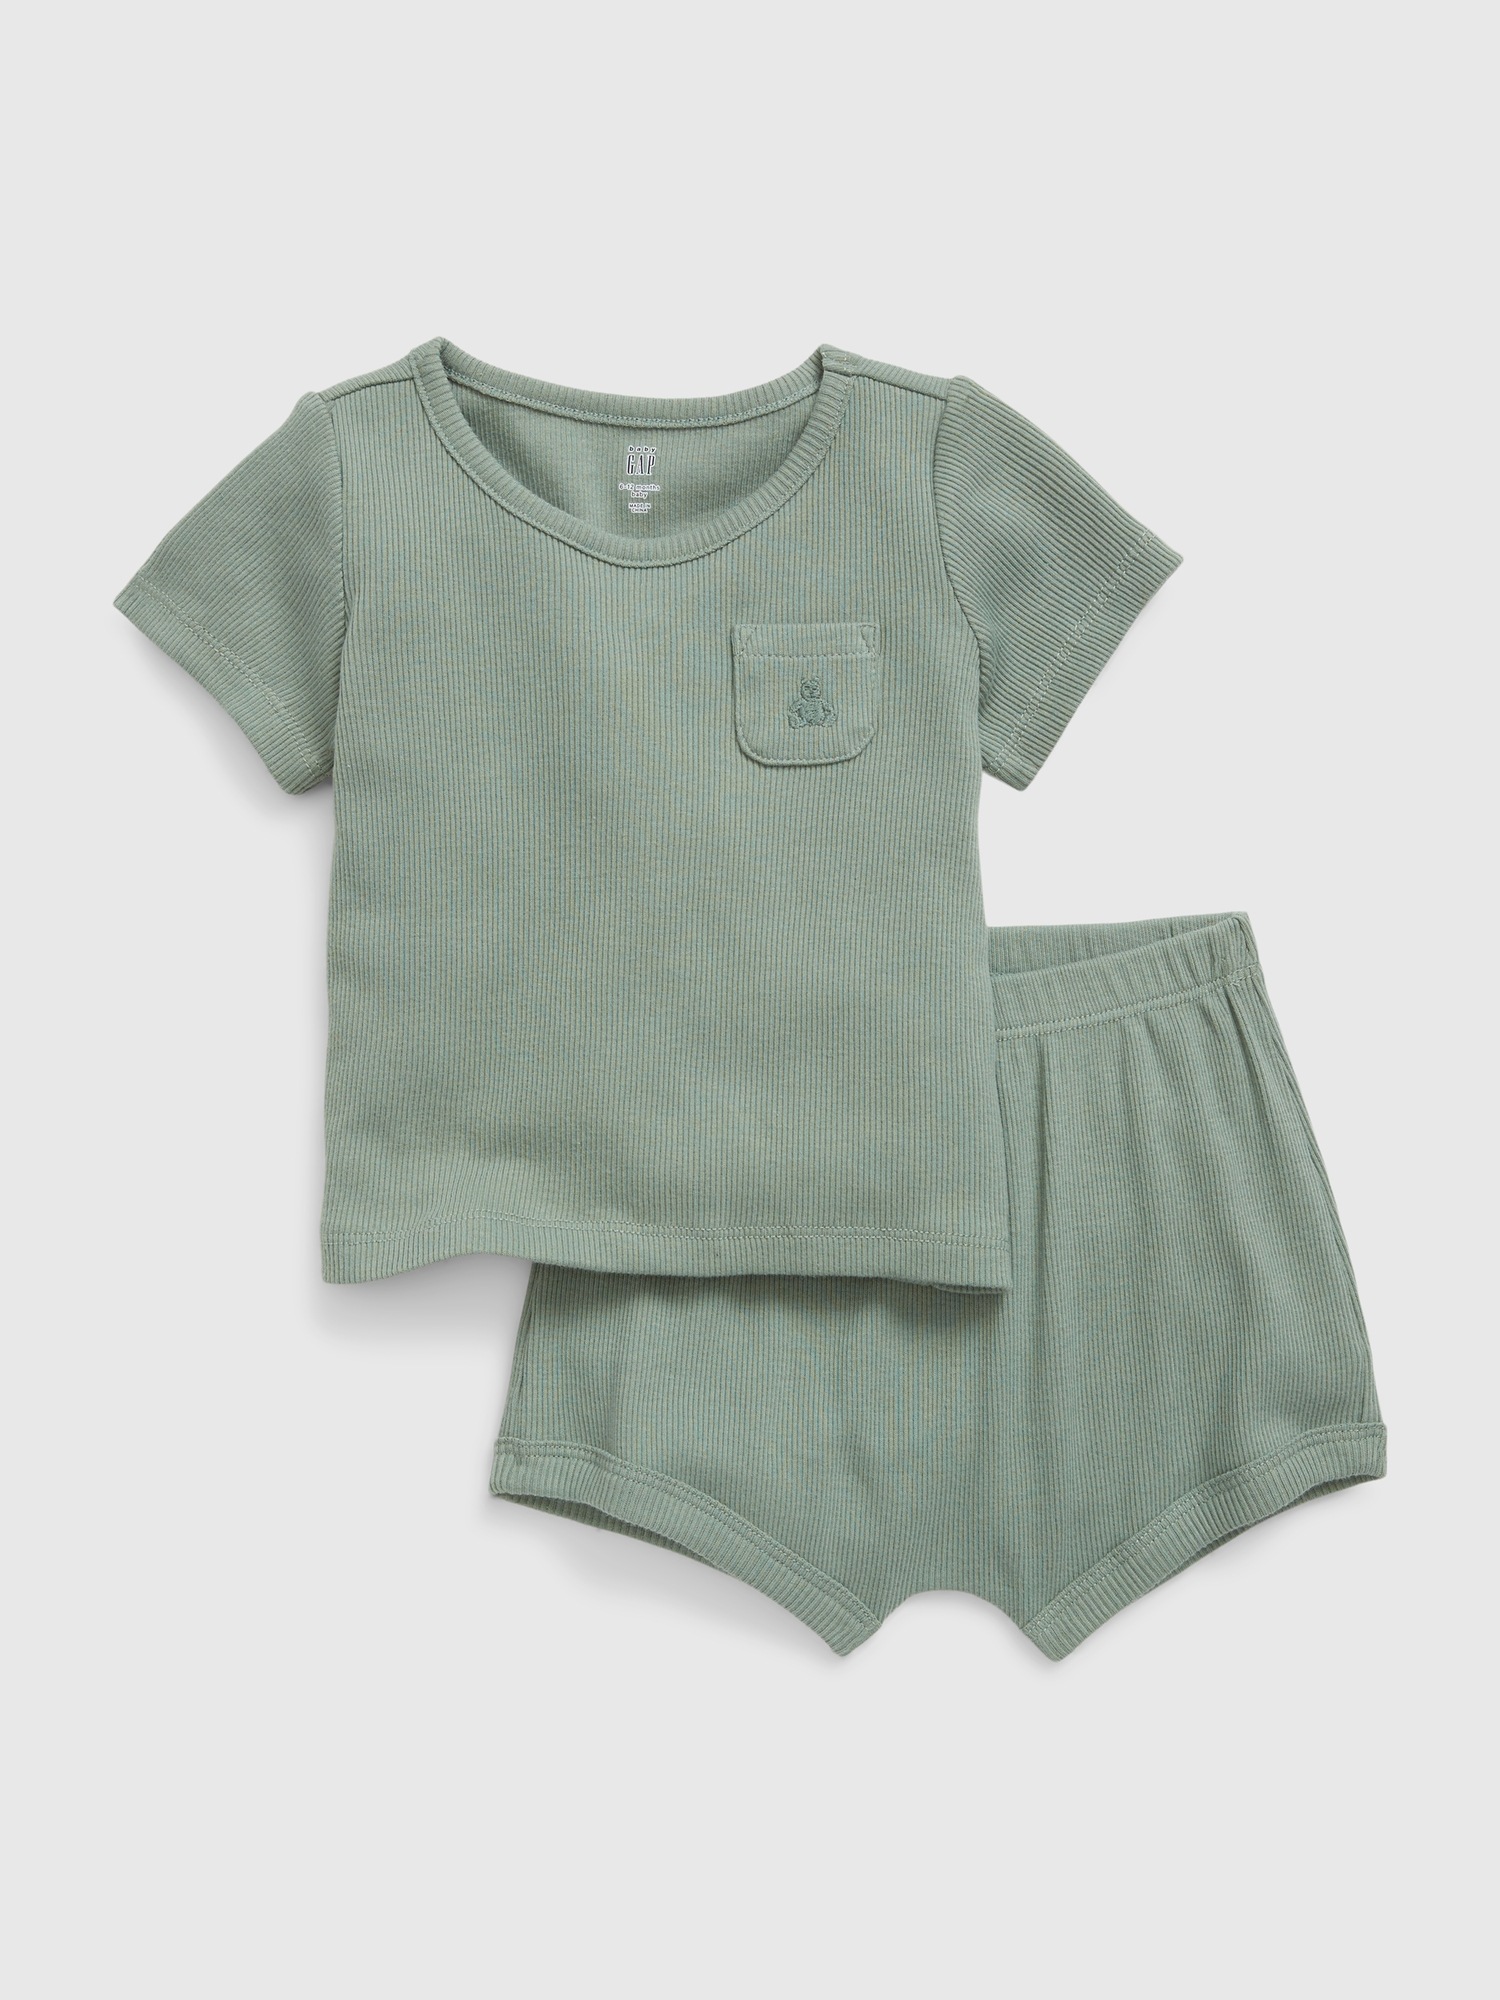 Gap Baby Rib 2-Piece Outfit Set green. 1